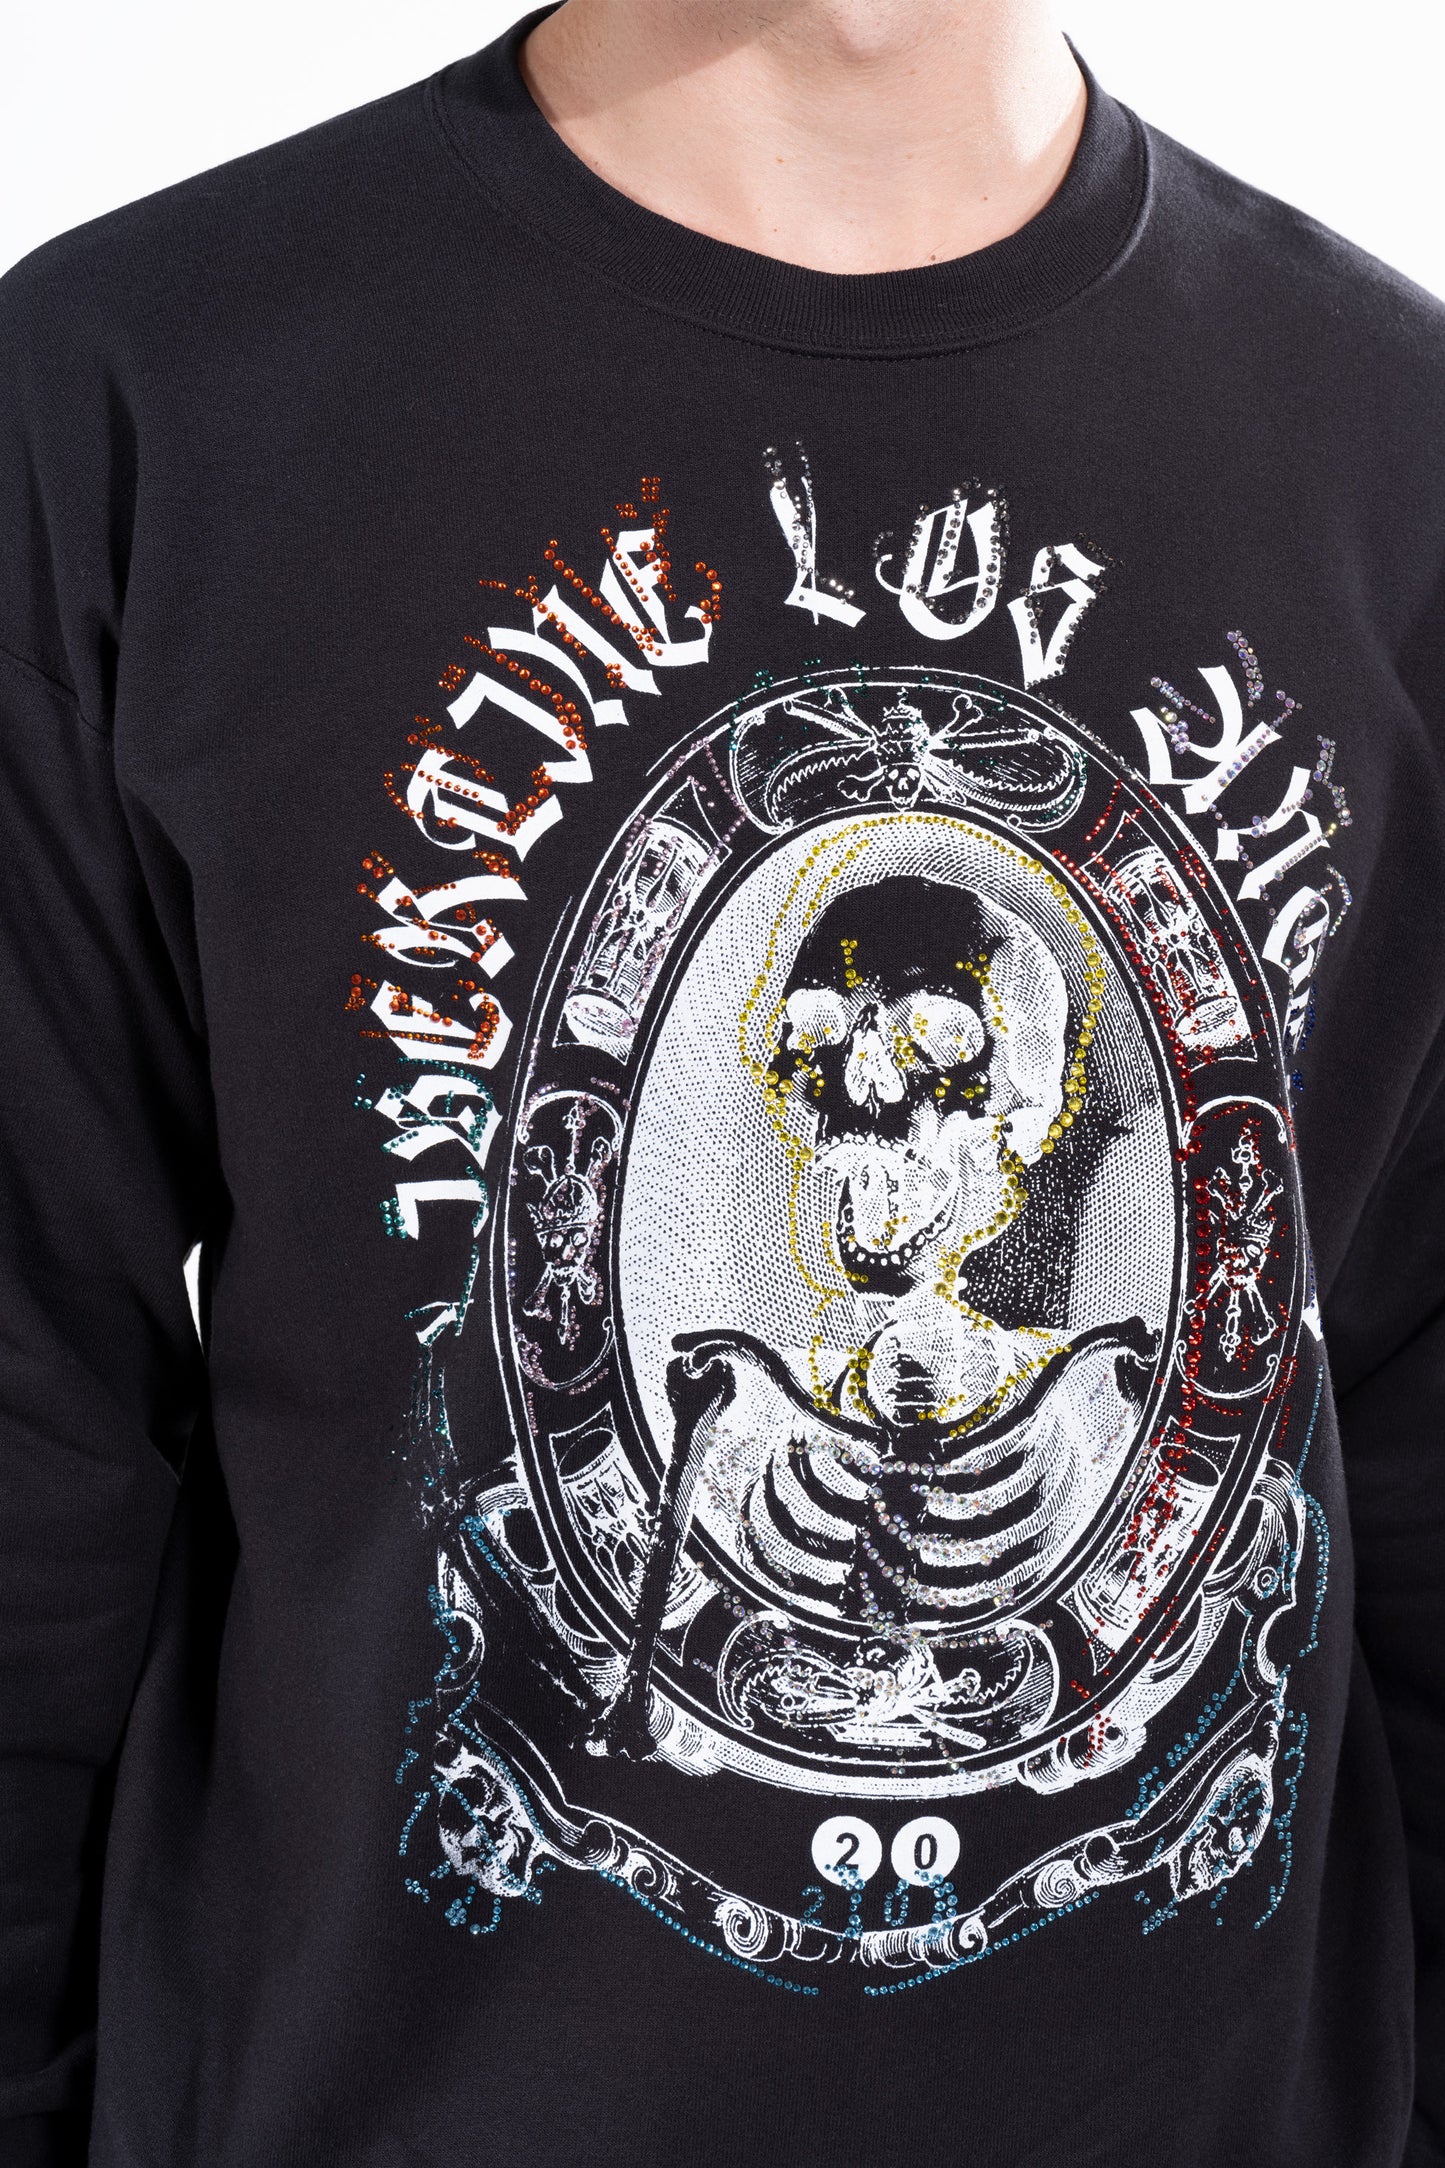 'ASHES TO ASHES WITH CRYSTALS' CREWNECK SWEATSHIRT -  - Libertine